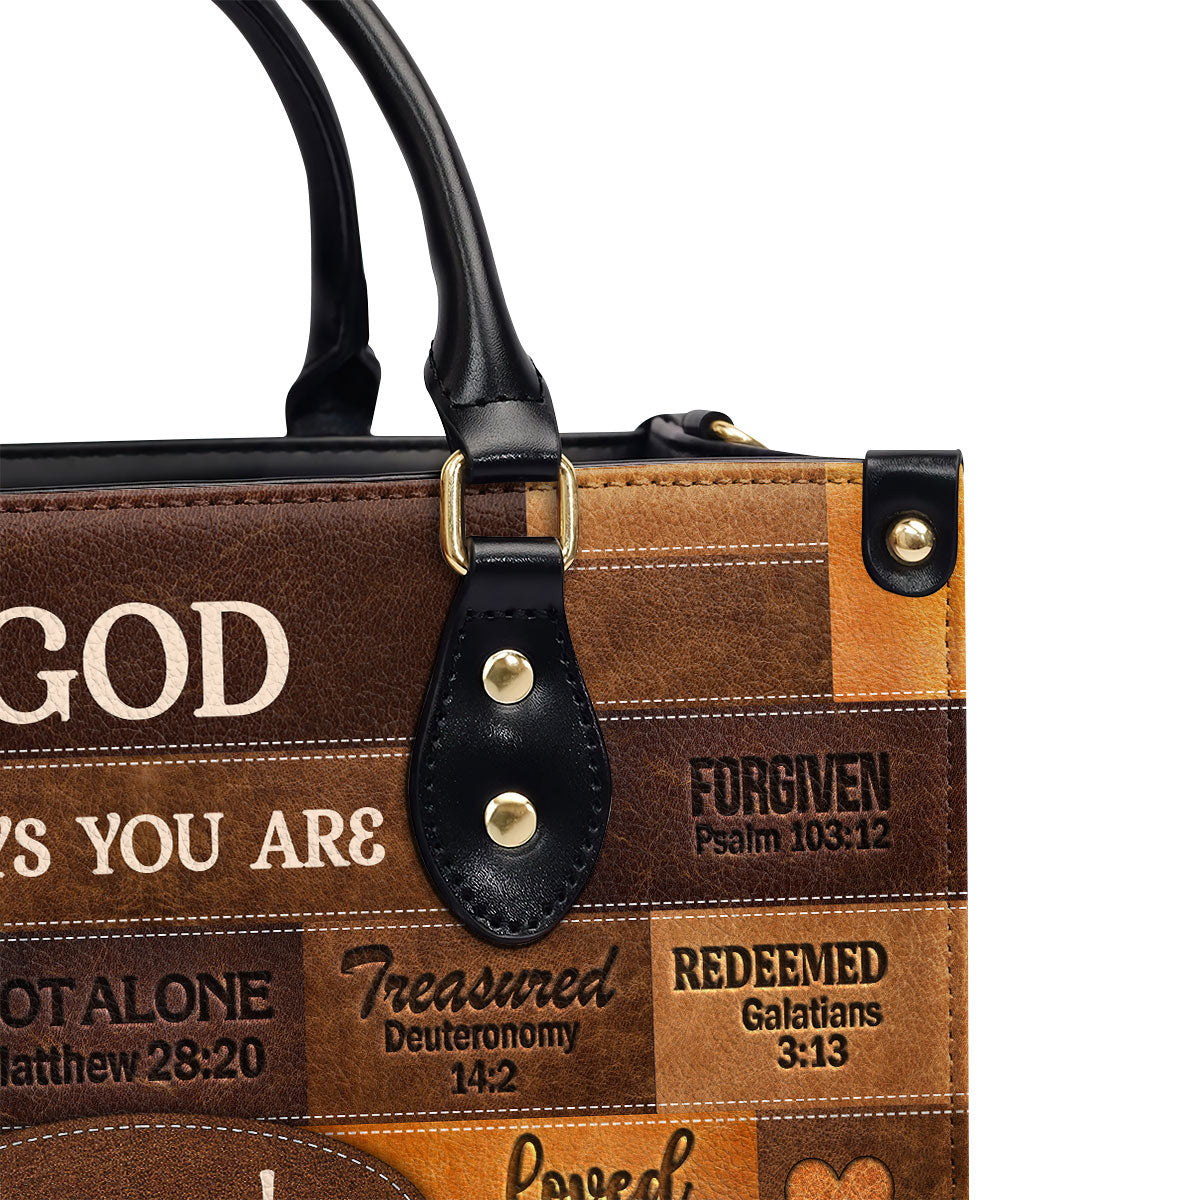 God Says I Am Personalized Leather Handbag With Zipper Gift For Her